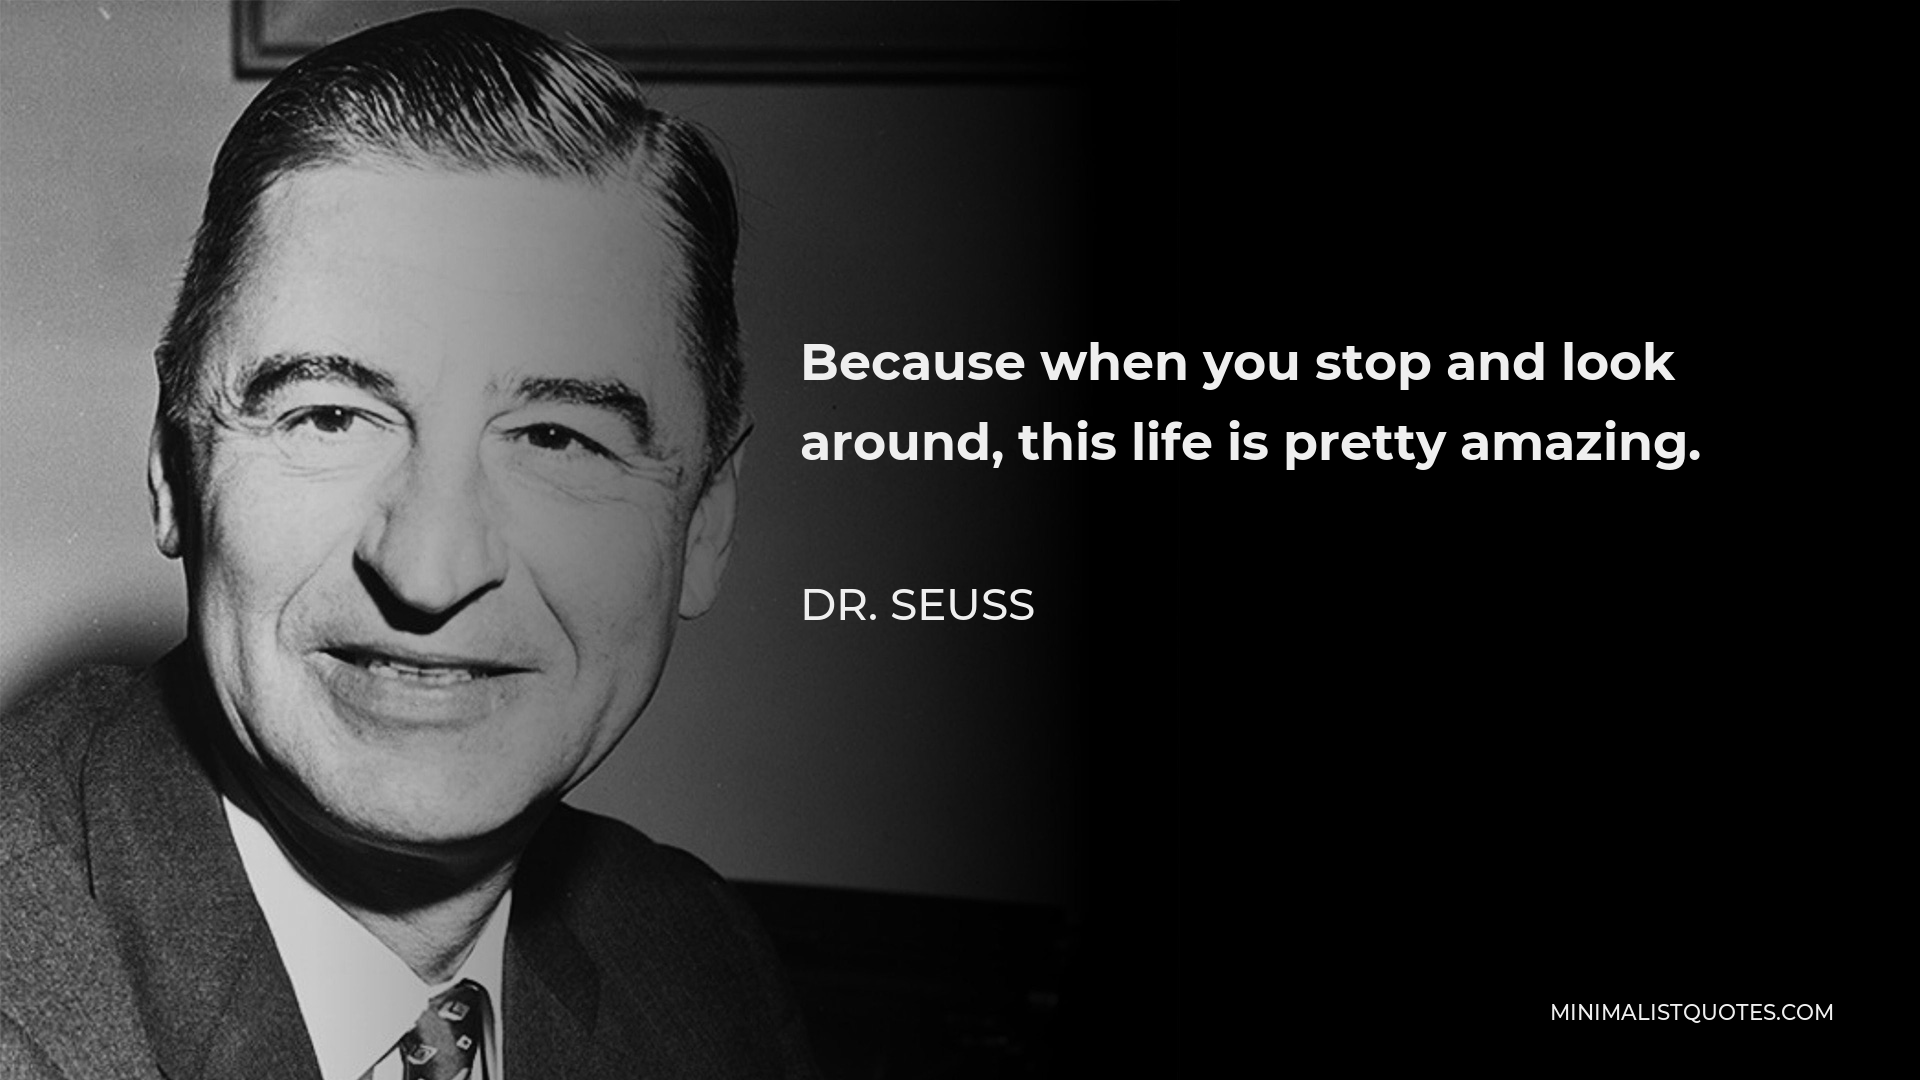 Dr. Seuss Quote - Because when you stop and look around, this life is pretty amazing.